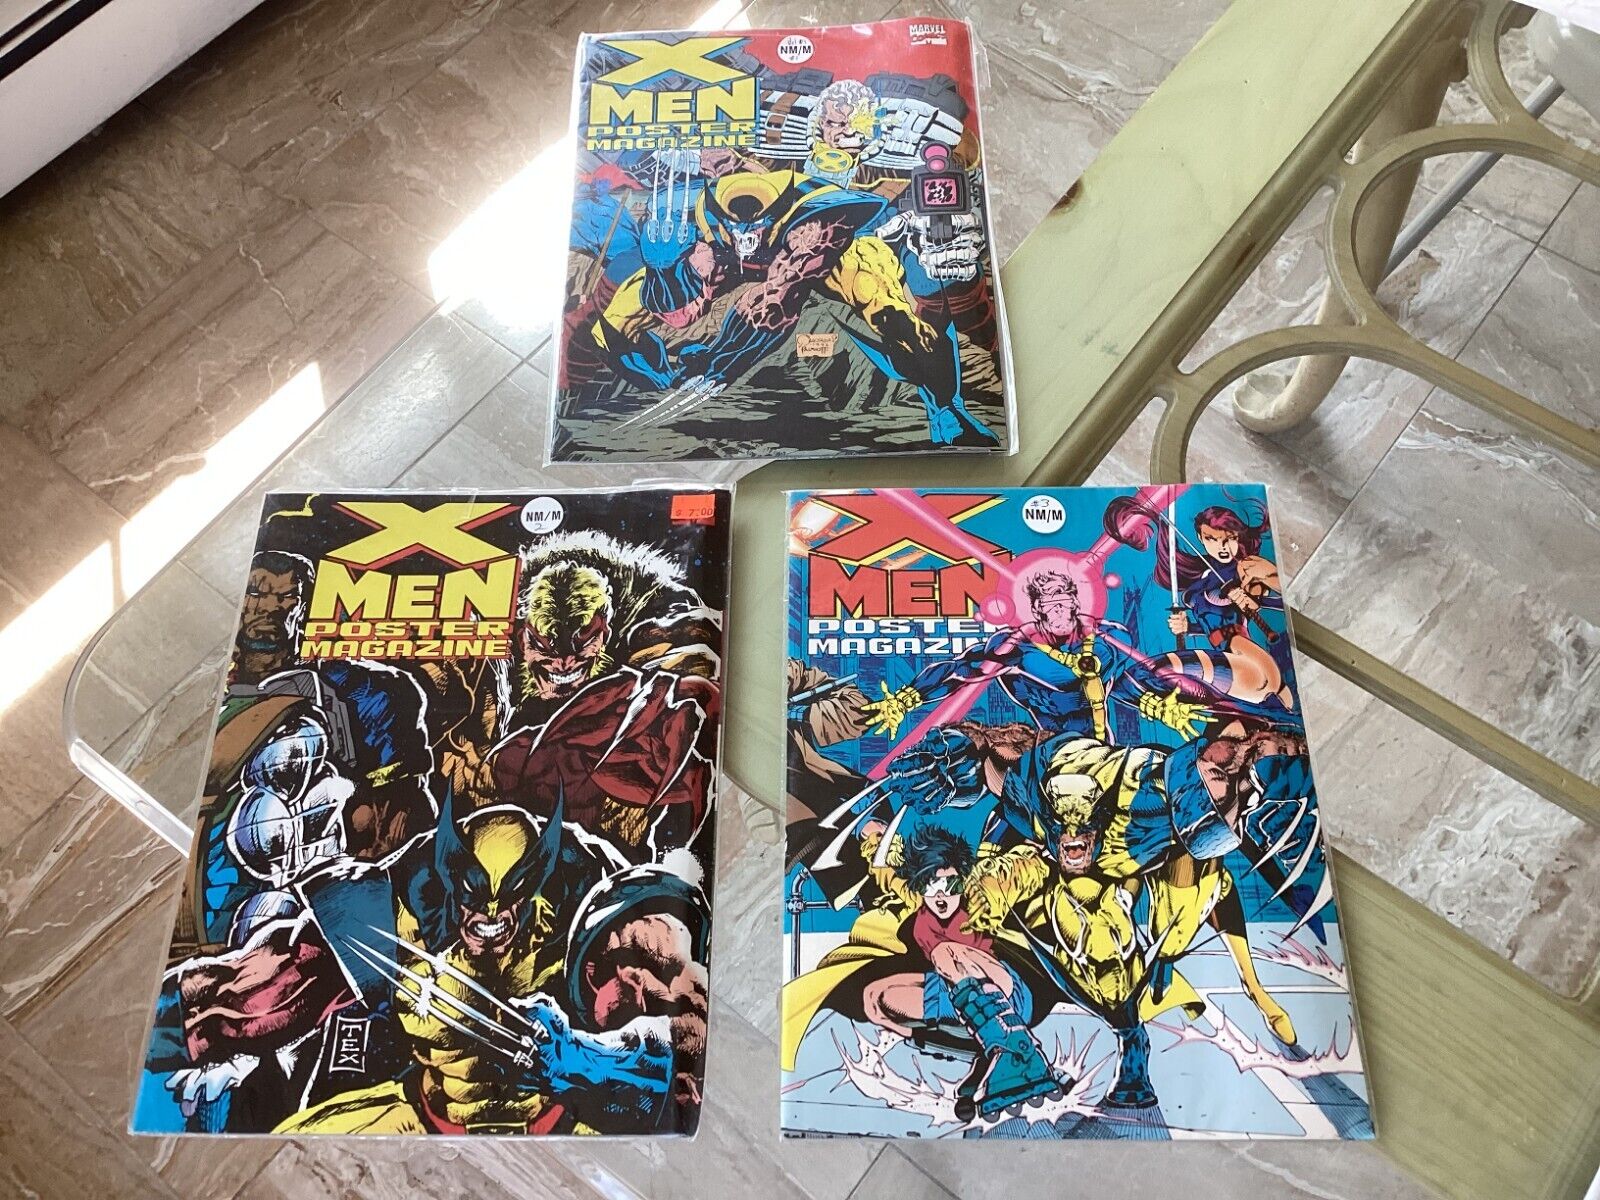 3 X-MEN POSTER MAGAZINES #1, 2, 3 1992, NEW Factory Sealed